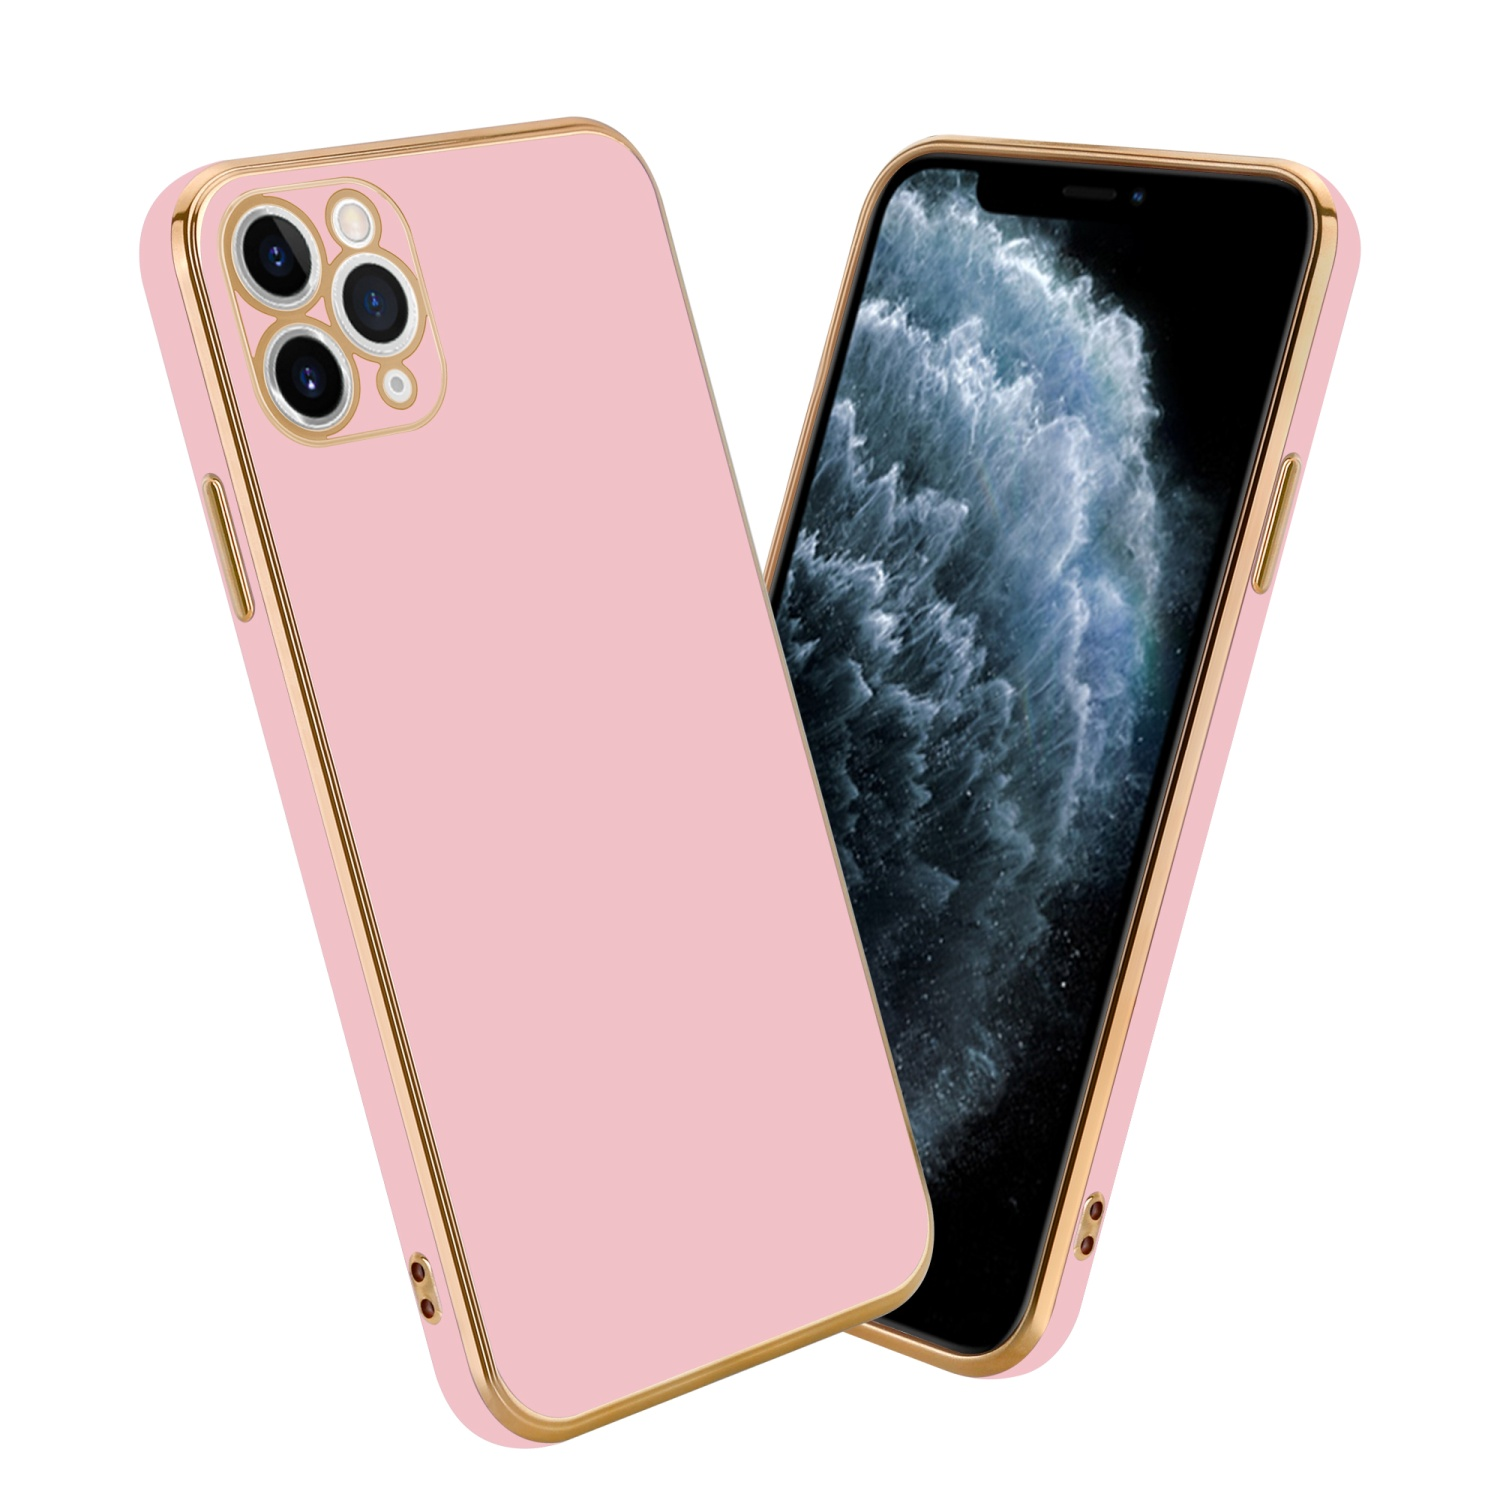 Glossy Backcover, Kameraschutz, Handyhülle CADORABO PRO 12 Rosa Gold - mit MAX, Apple, iPhone